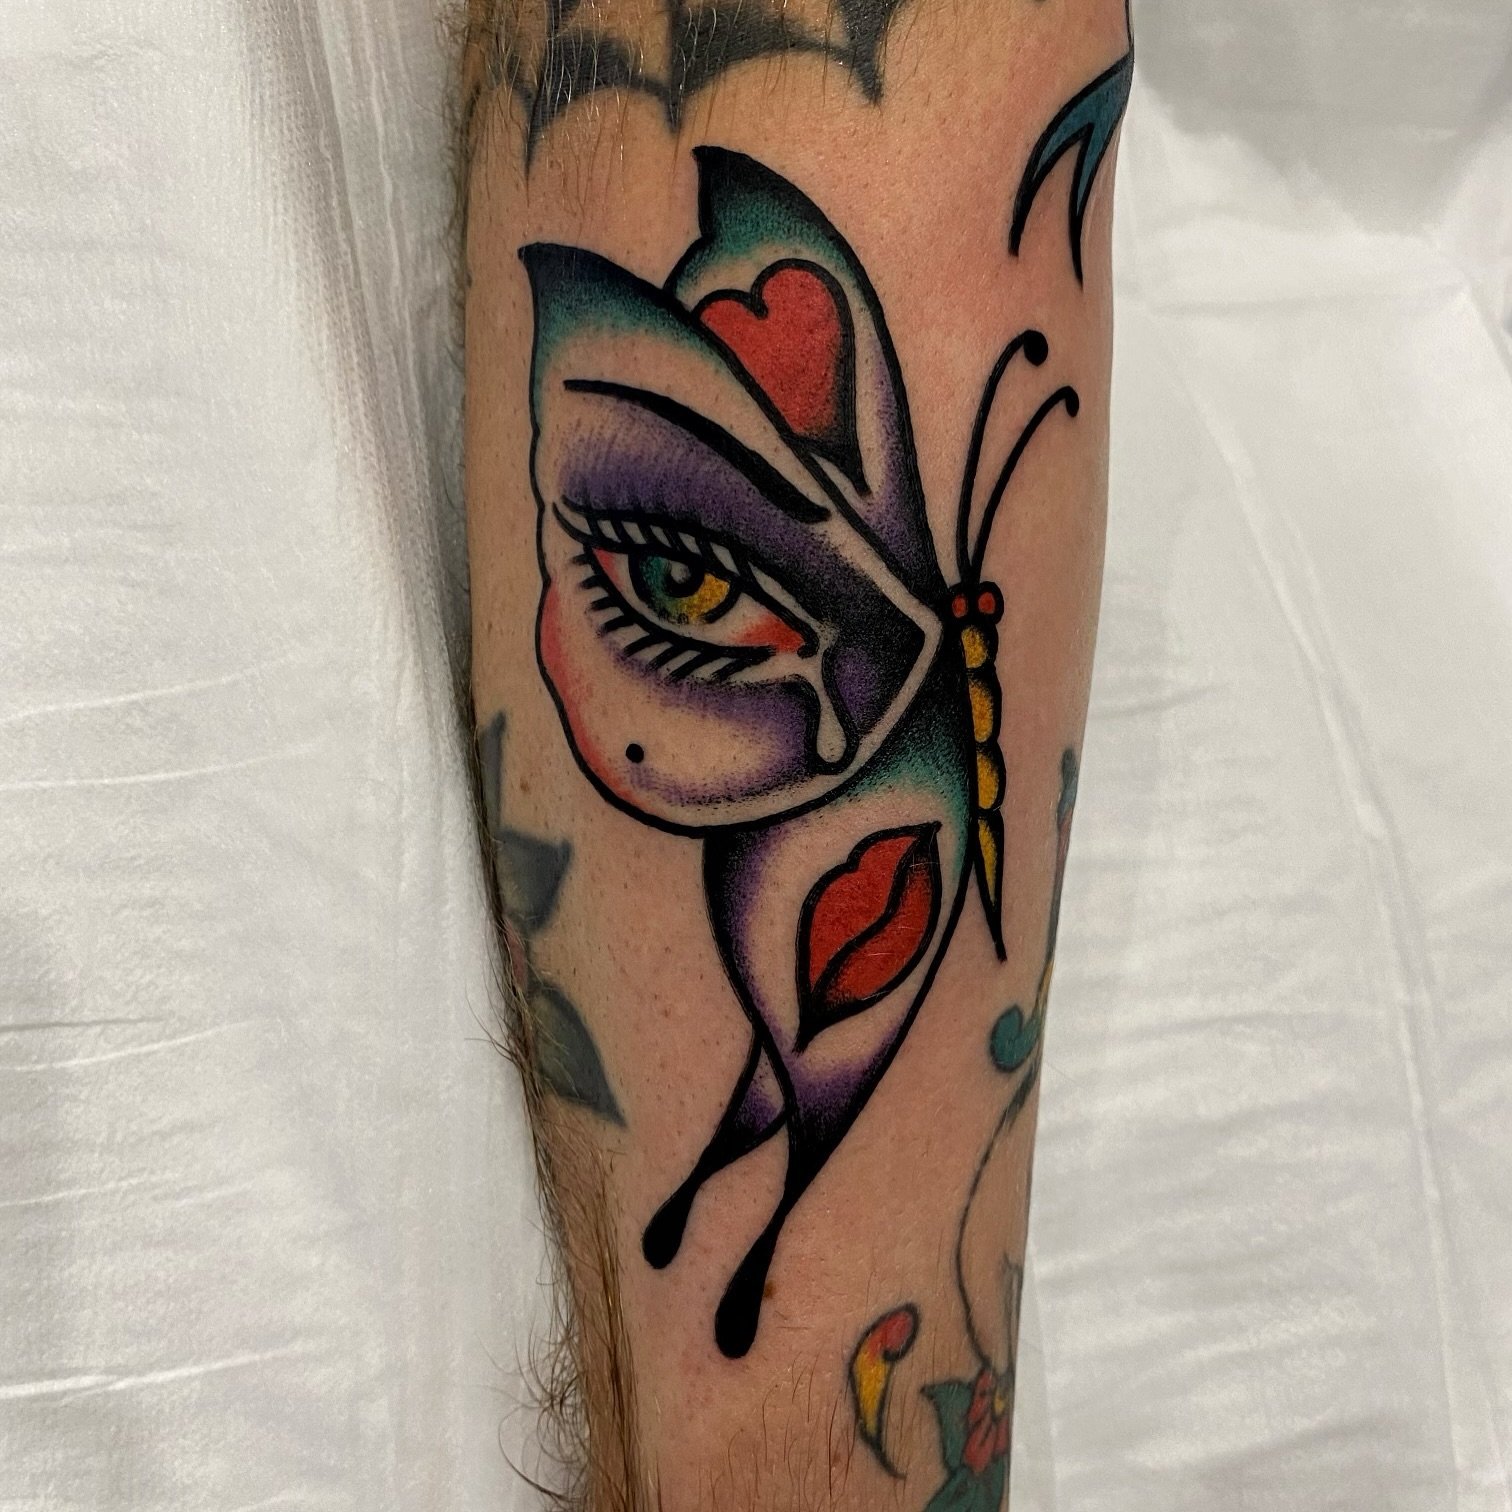 Lady + Butterfly 🦋 by @karlwillmann 
Karl is with us on Fridays and Saturdays! DM to book in, call 07 5648 0626 or fill in our booking form via the website 
&bull;
&bull;
&bull;
&bull;
&bull;
#new #fyp #tradtattoo #goldcoast #goldcoasttattoo #visitg